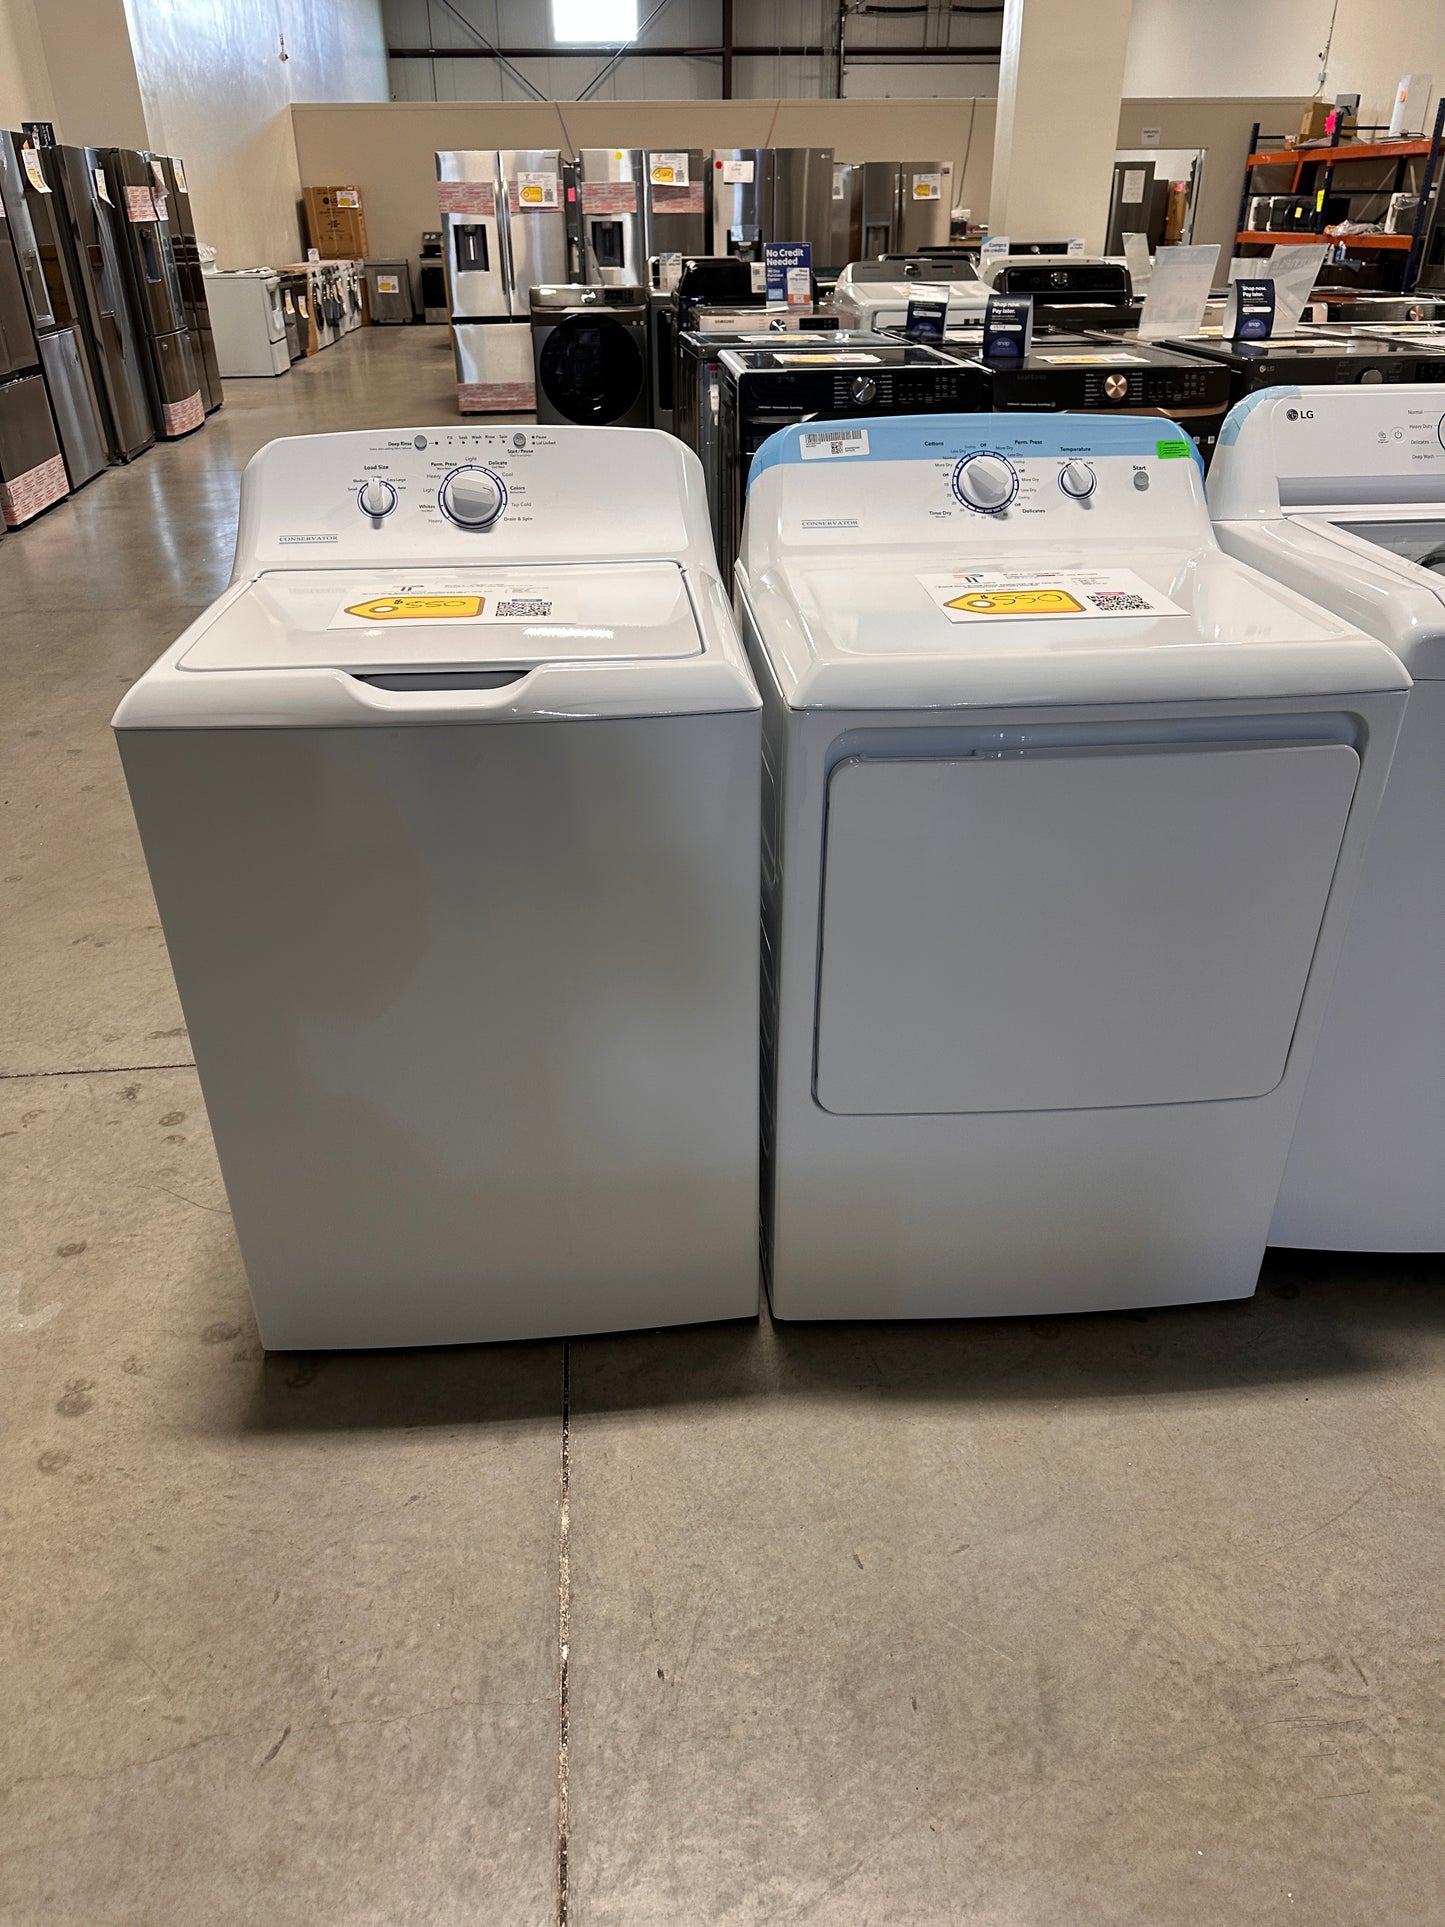 GORGEOUS TOP LOAD WASHER ELECTRIC DRYER LAUNDRY SET - WAS13251 DRY12544